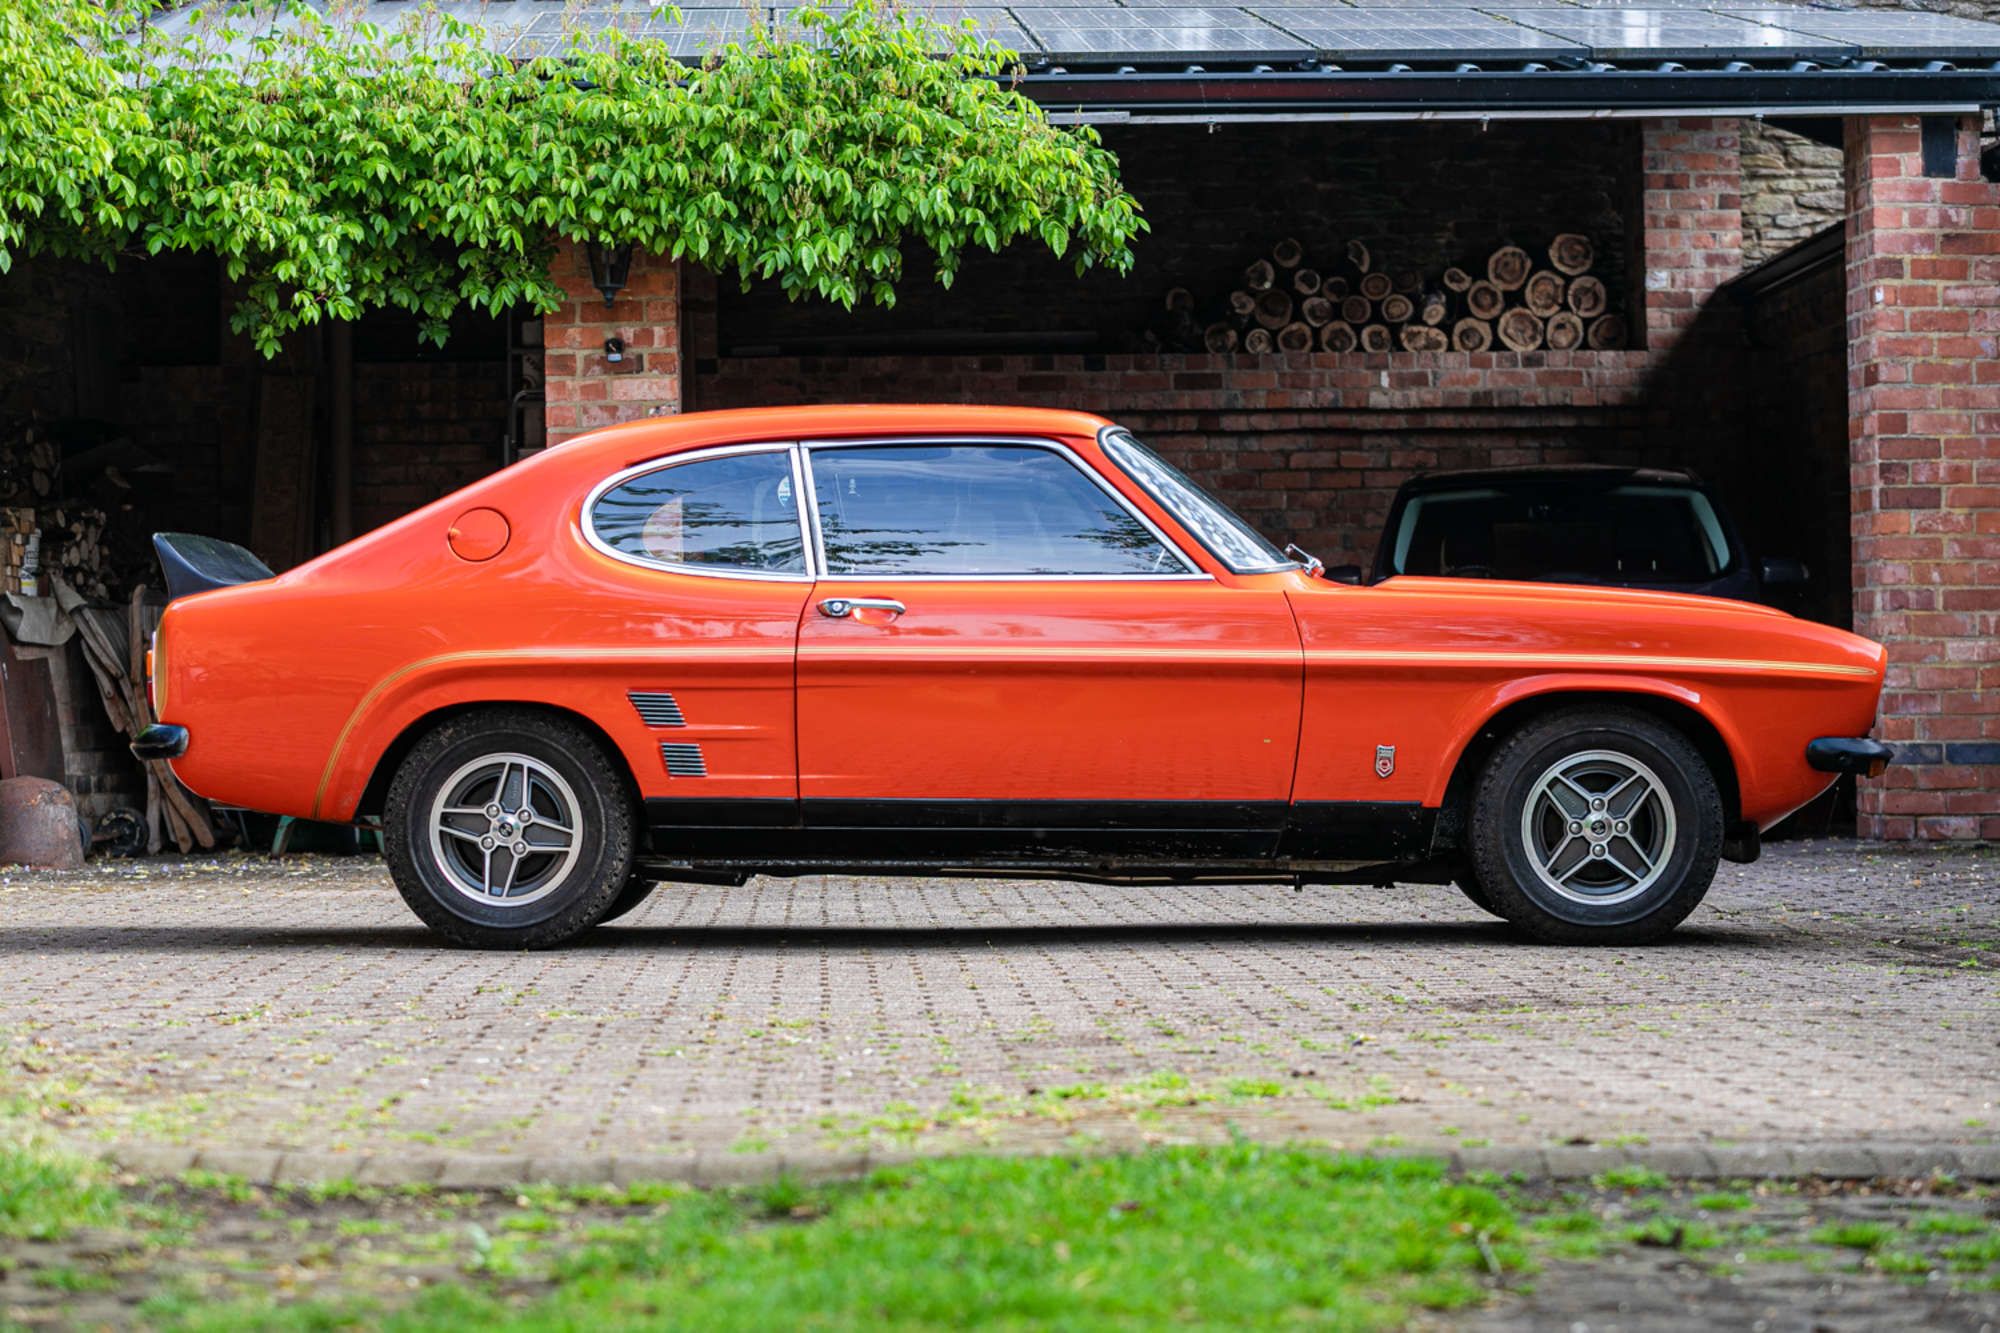 The 1975 Ford Capri RS3100 side view.